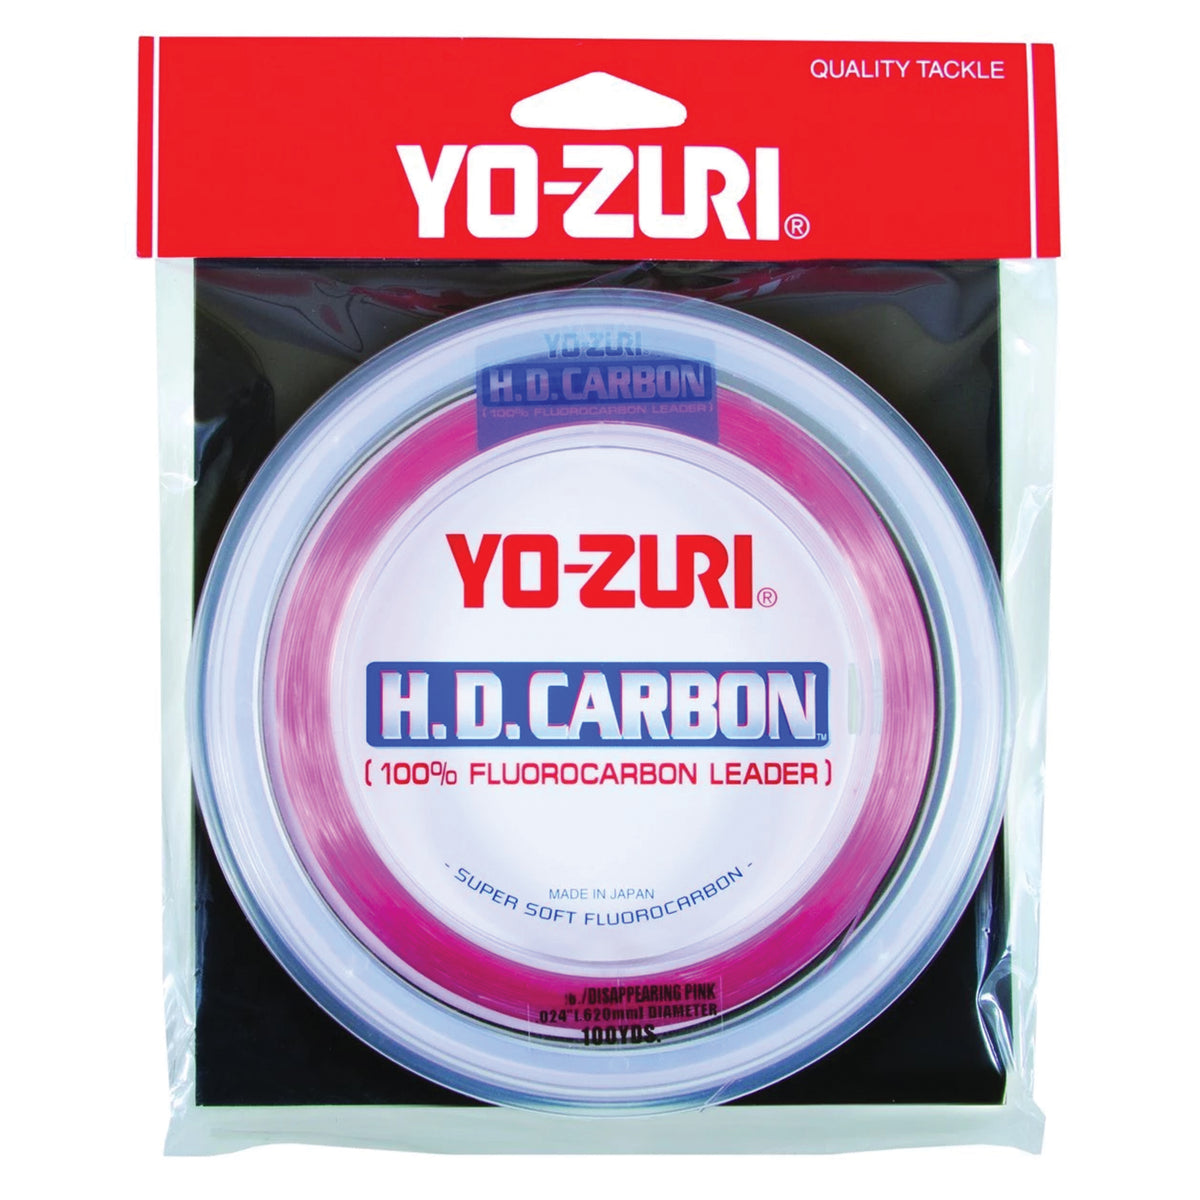 Yozuri HD Carbon 100% Fluorocarbon leader Disappearing PINK 30 yds.